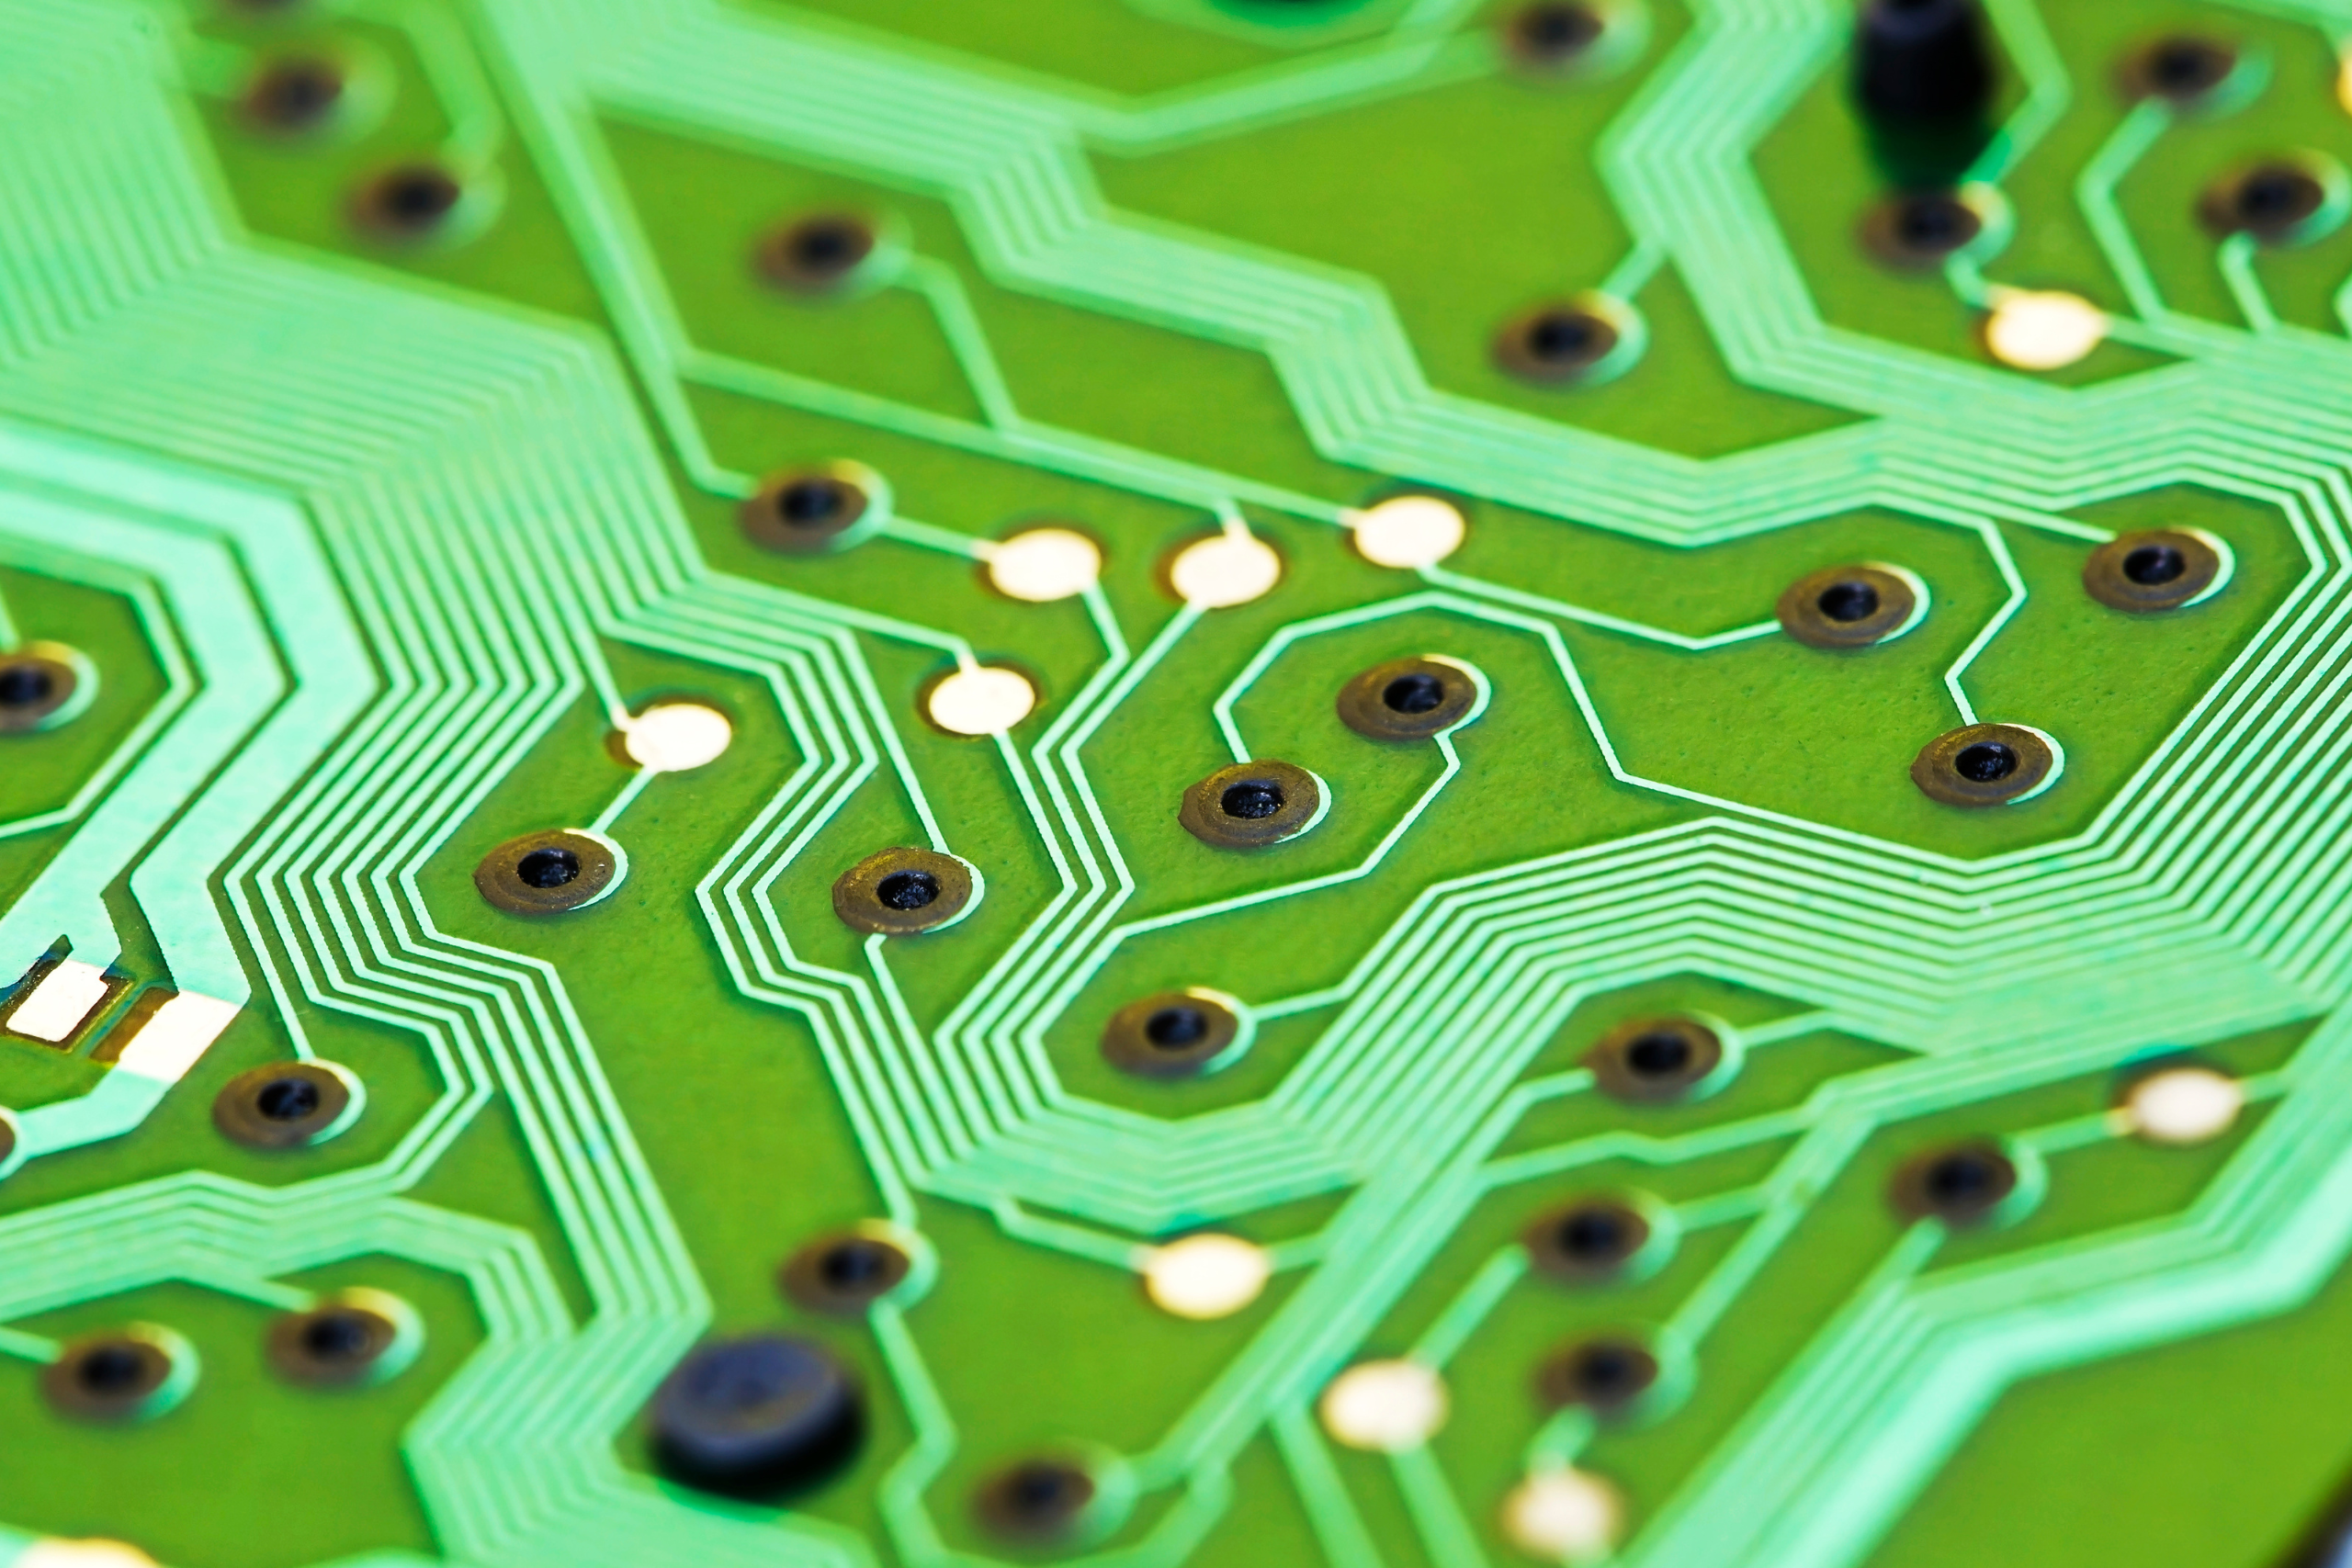 Web banner of a green circuit board